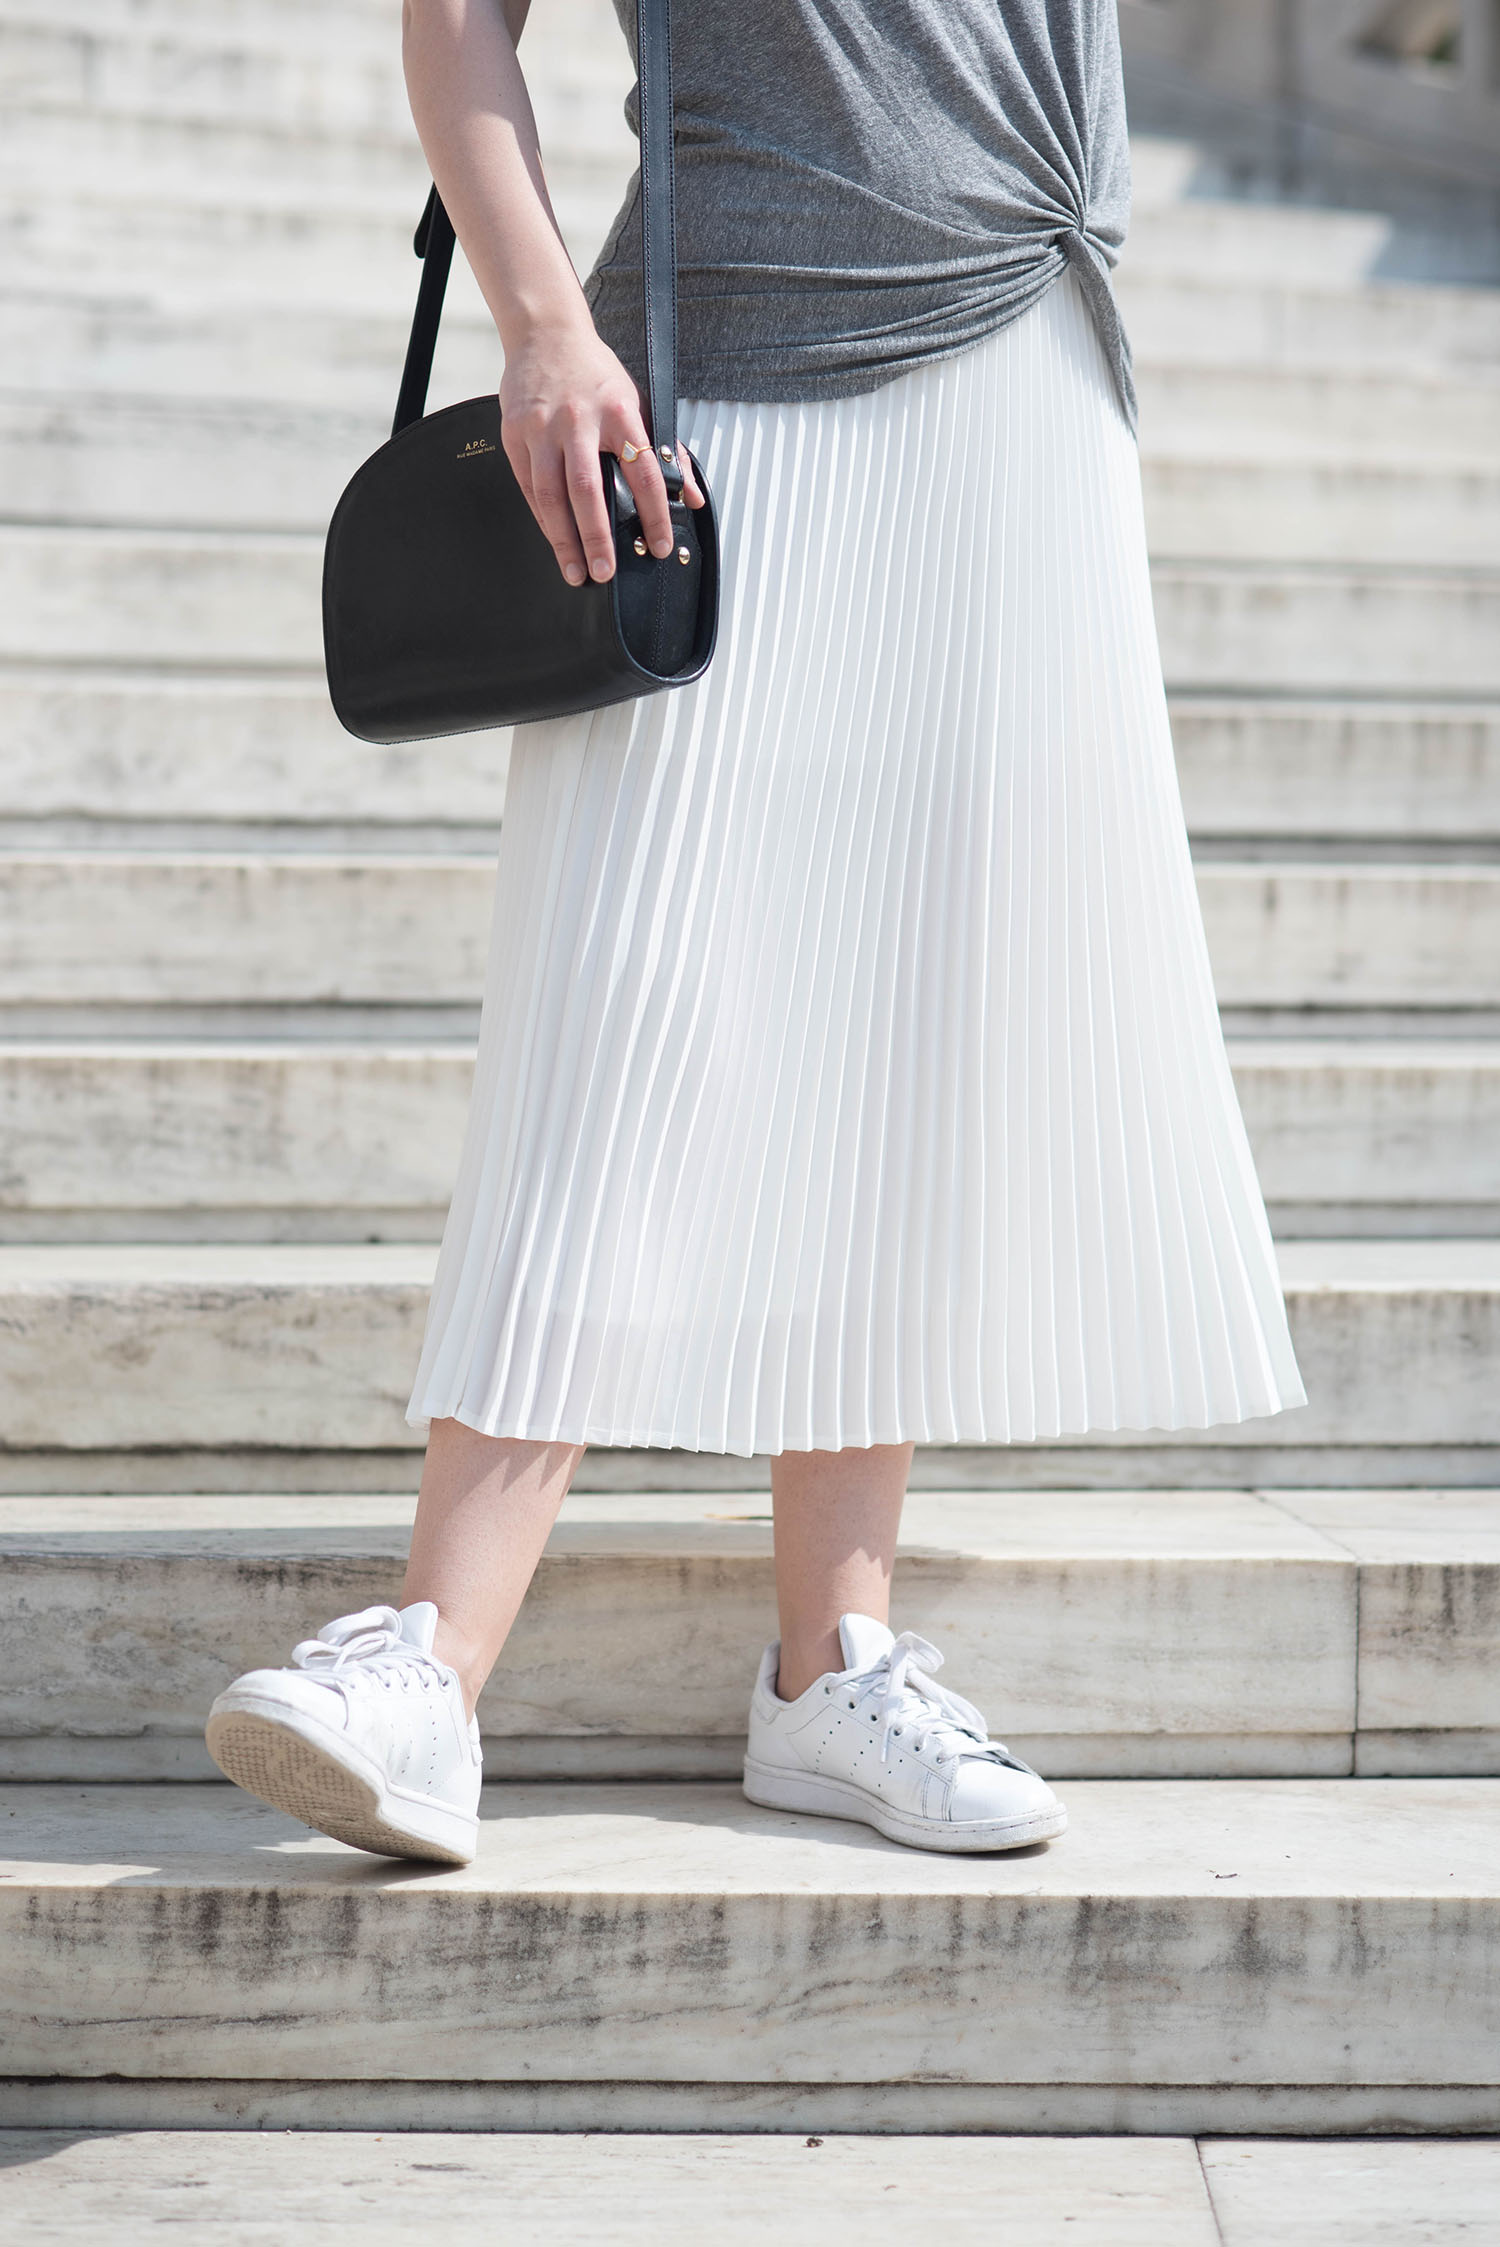 Outfit details on style blogger Cee Fardoe, including an APC halfmoon bag and Adidas Stan Smith sneakers